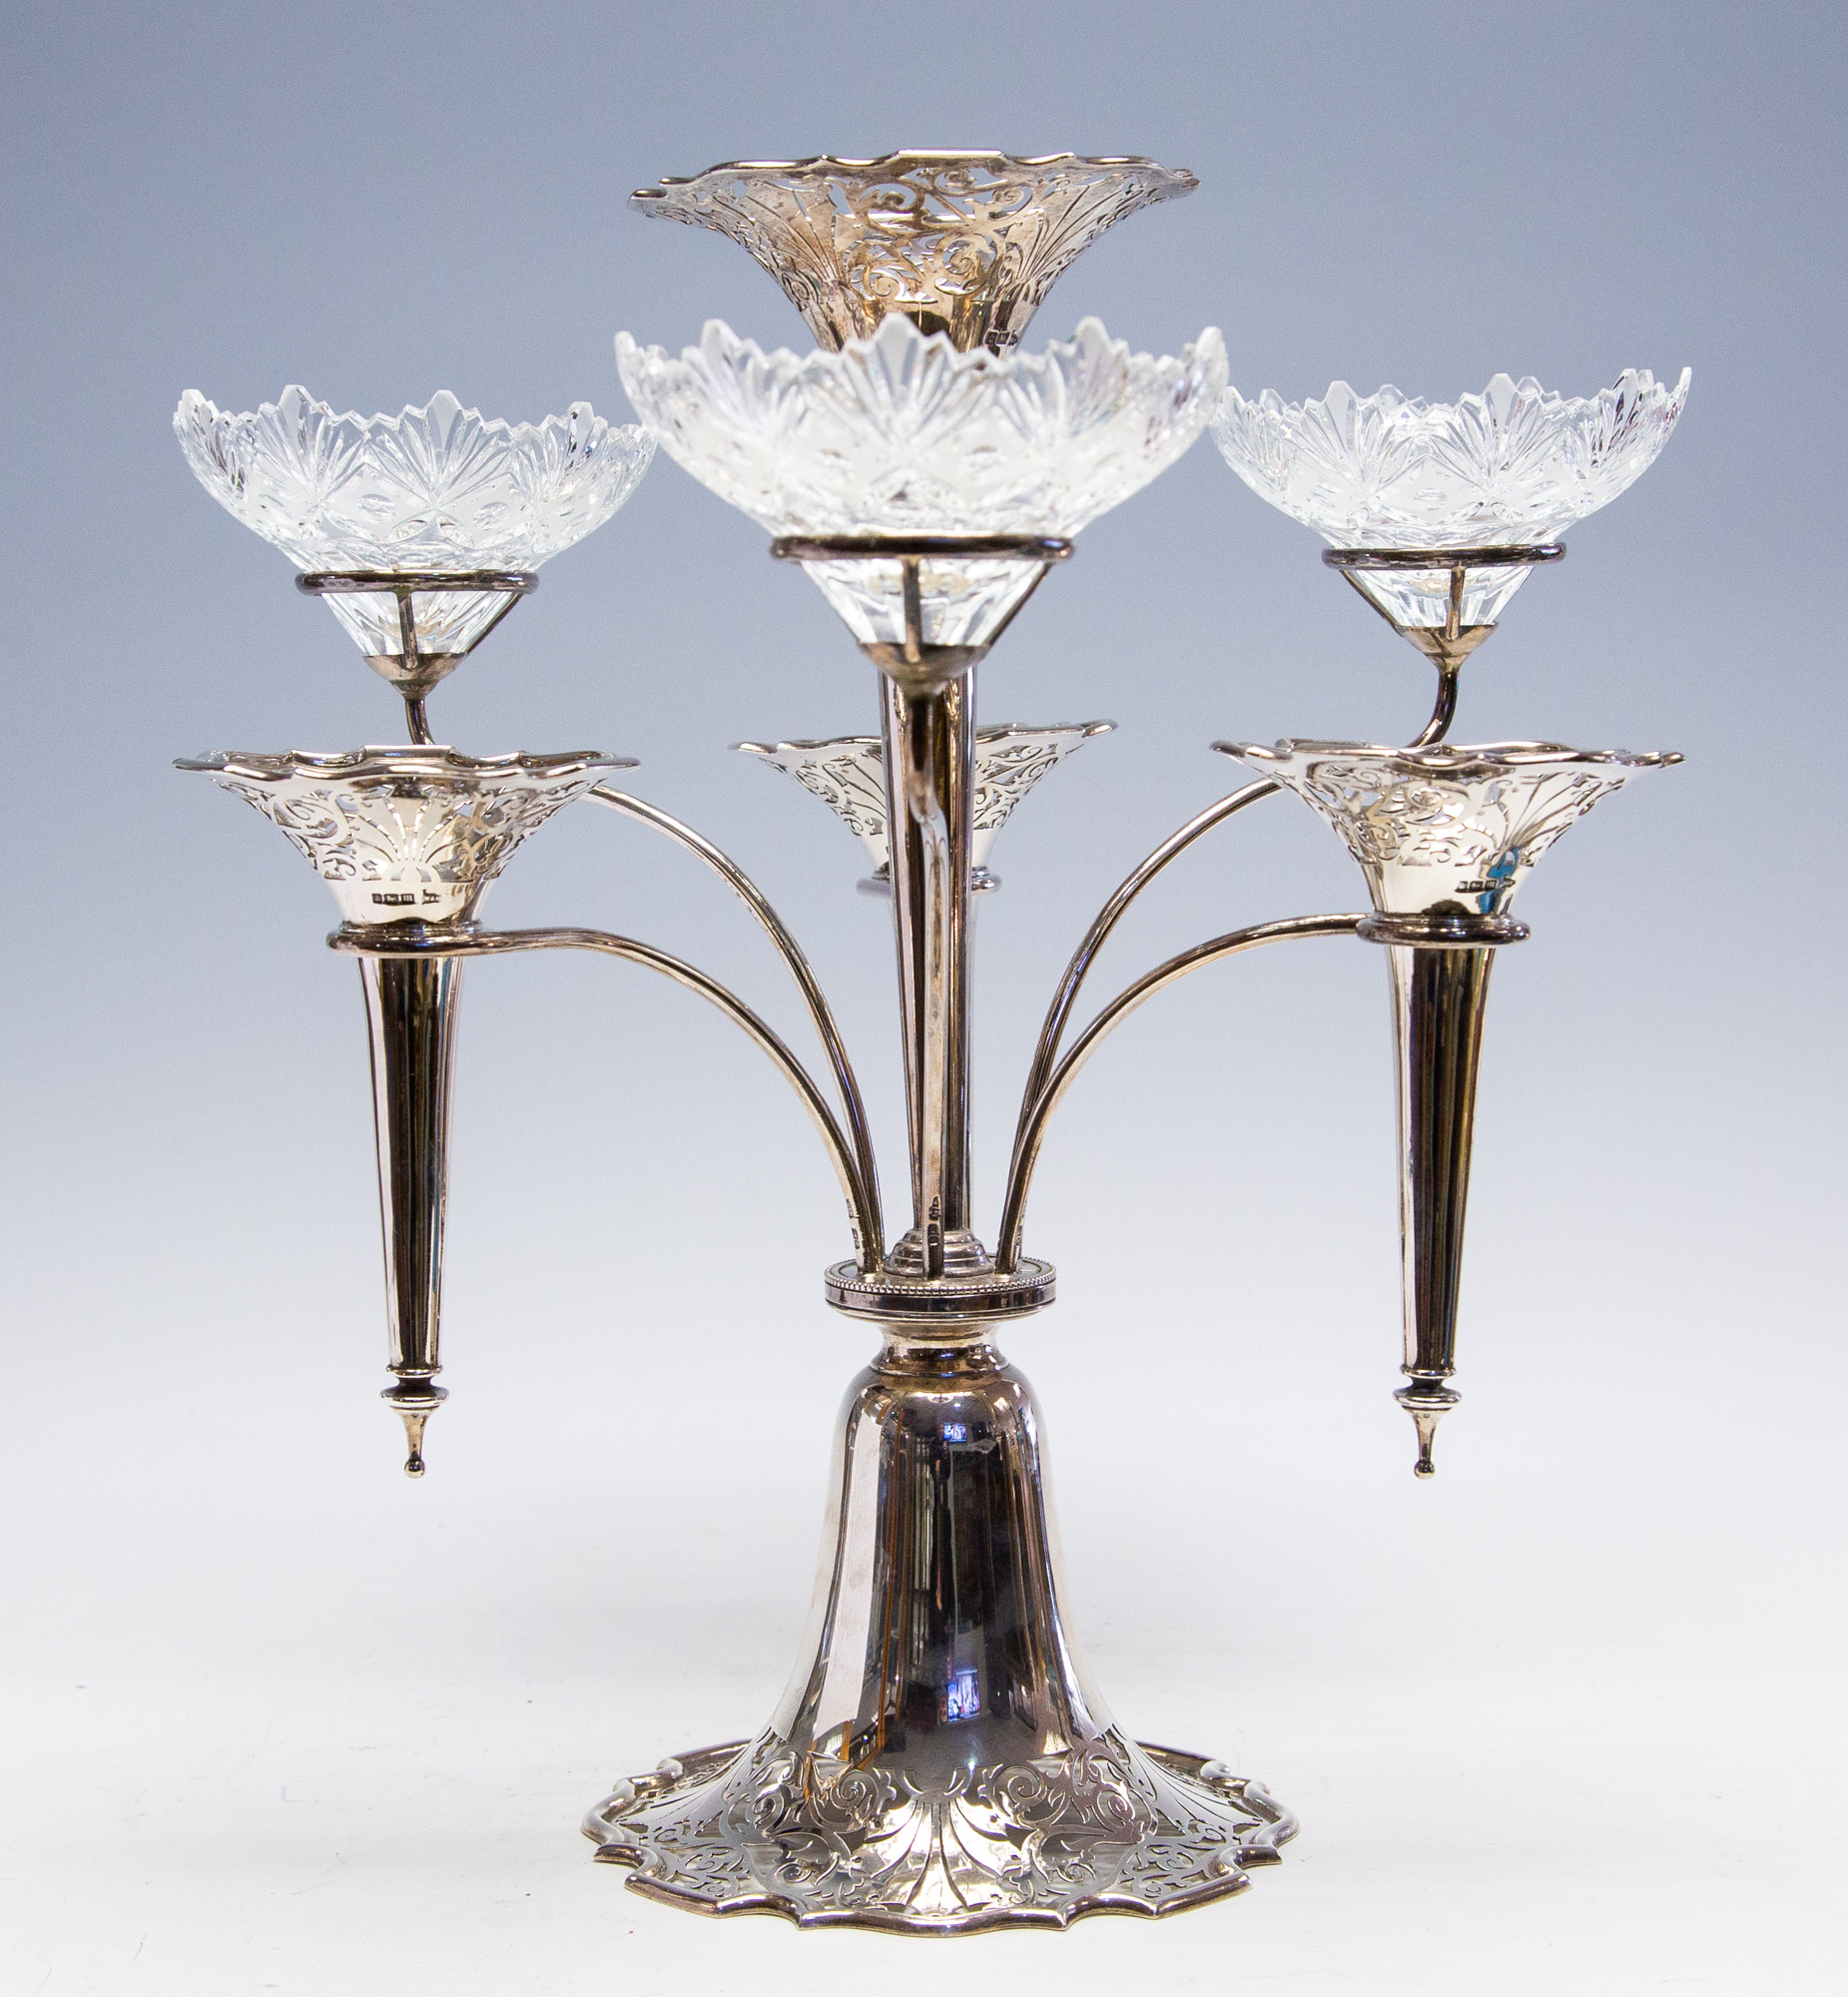 An Edwardian silver and glass six banch epergne